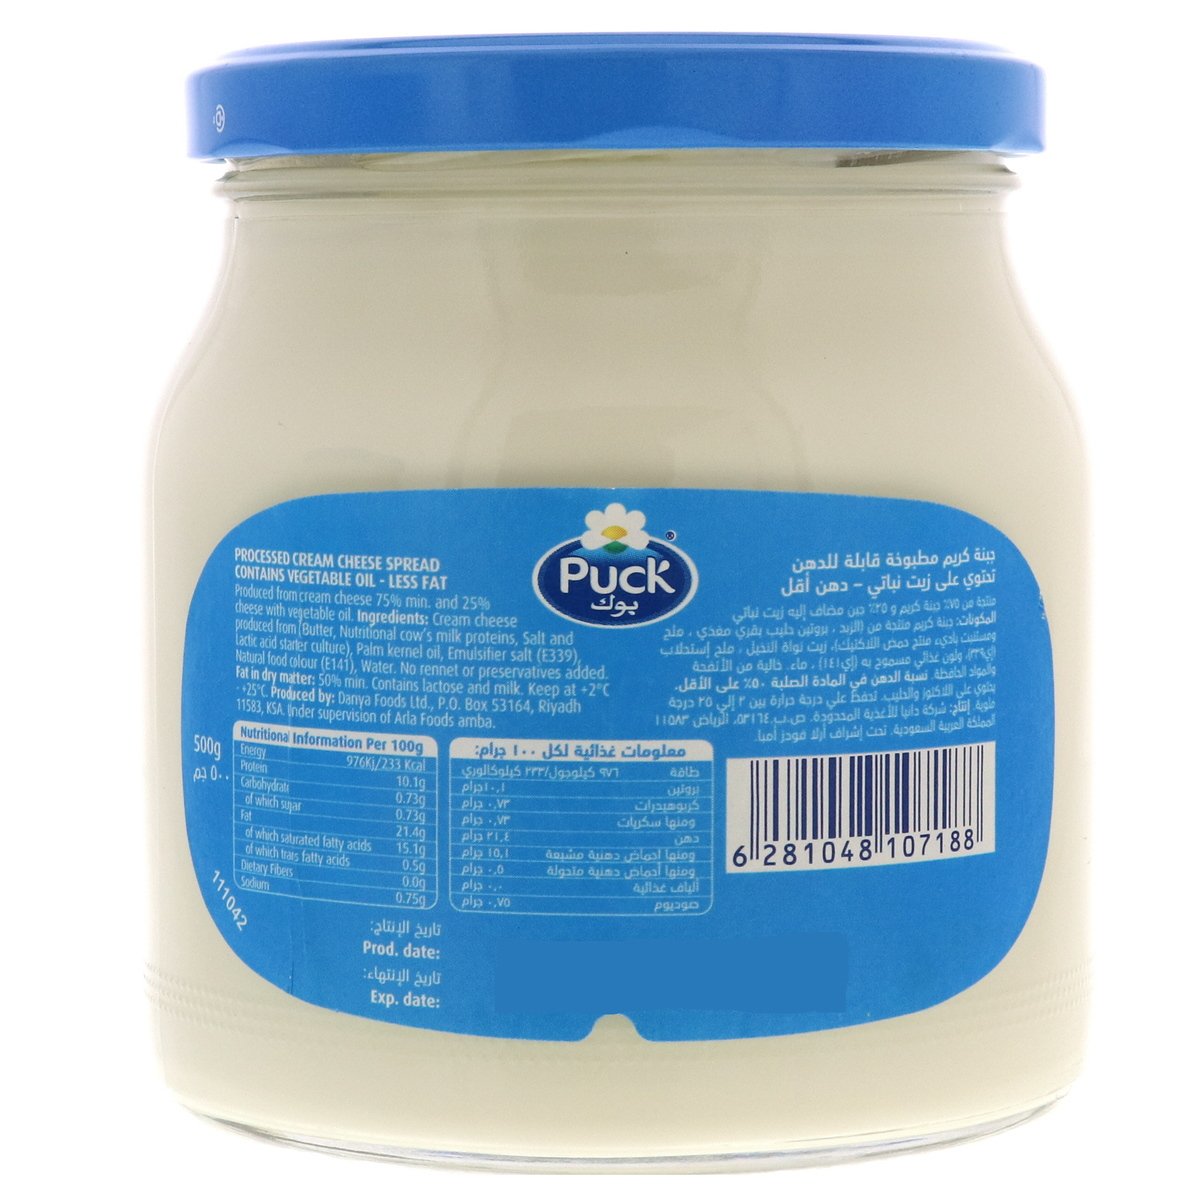 Puck Low Fat Cream Cheese Spread 2 x 500 g